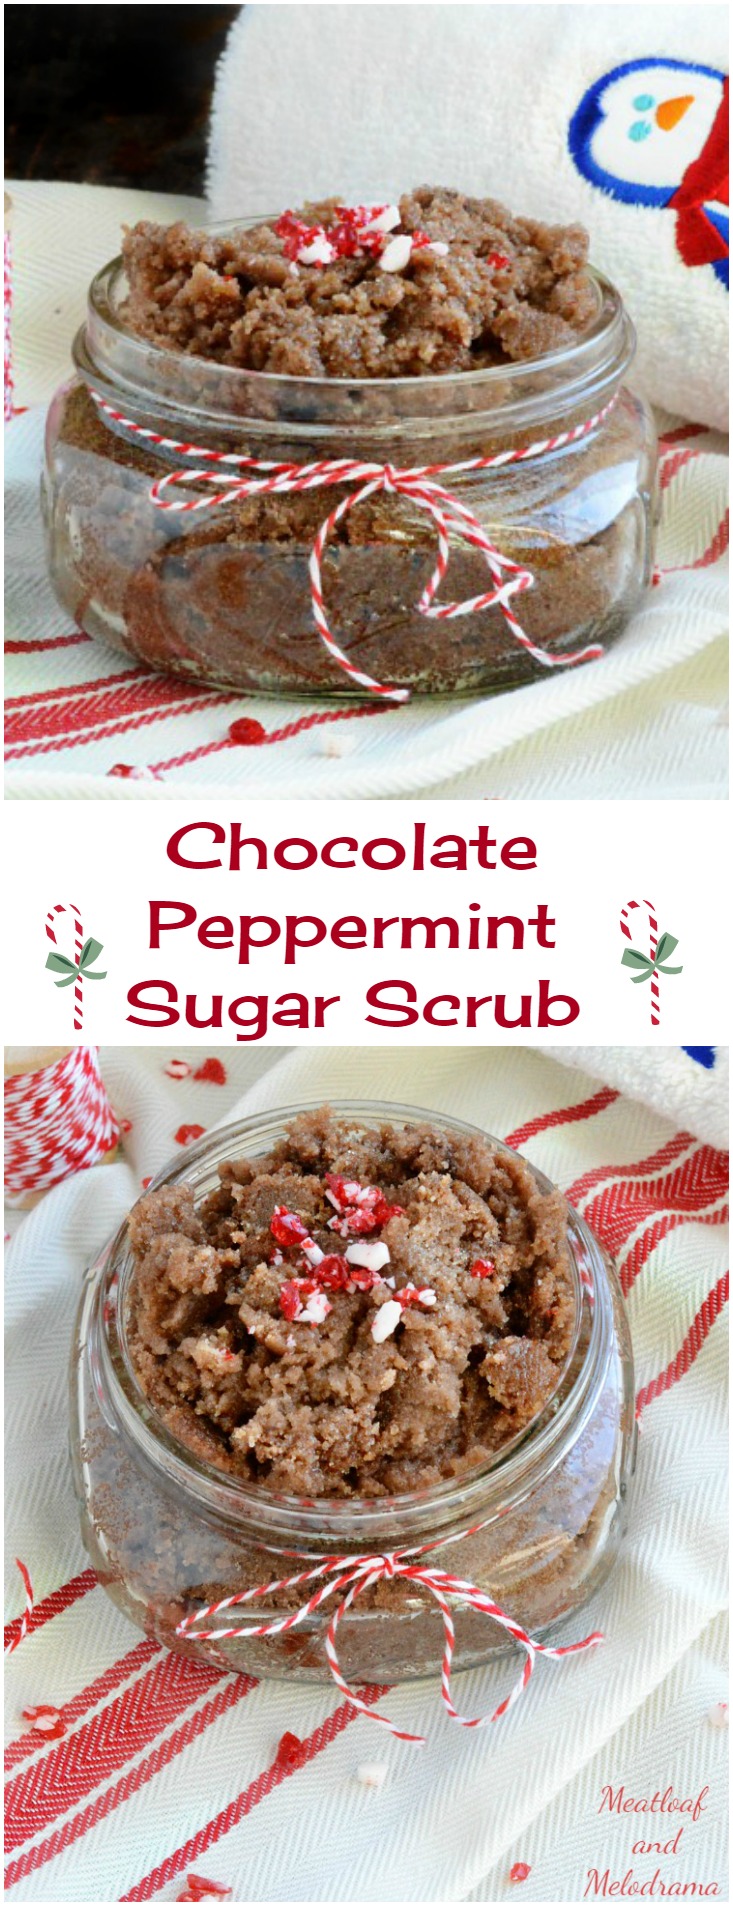 DIY Chocolate Peppermint Sugar Scrub is easy to make, inexpensive and perfect for Homemade Christmas Holiday gifts